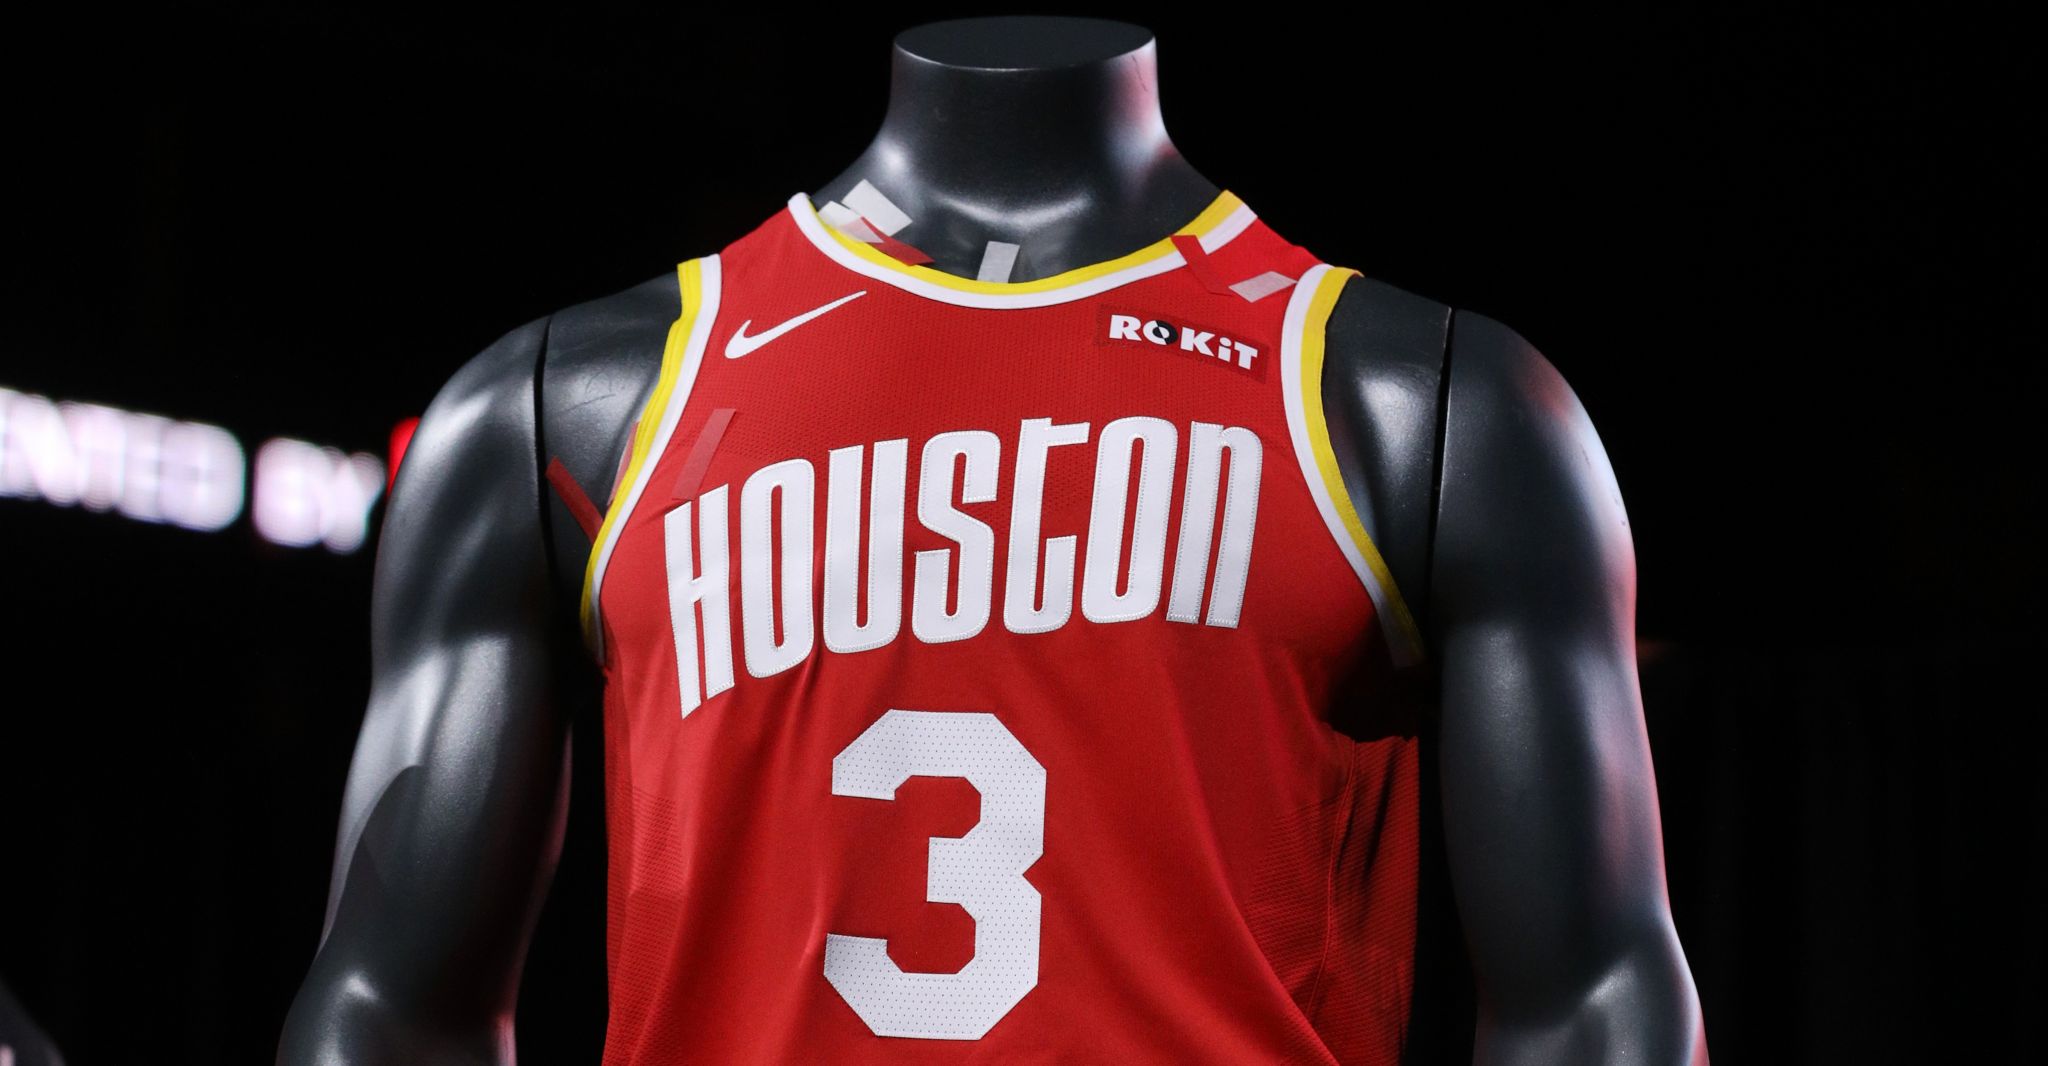 With Rockets unveiling new uniforms, here's how Rockets jerseys